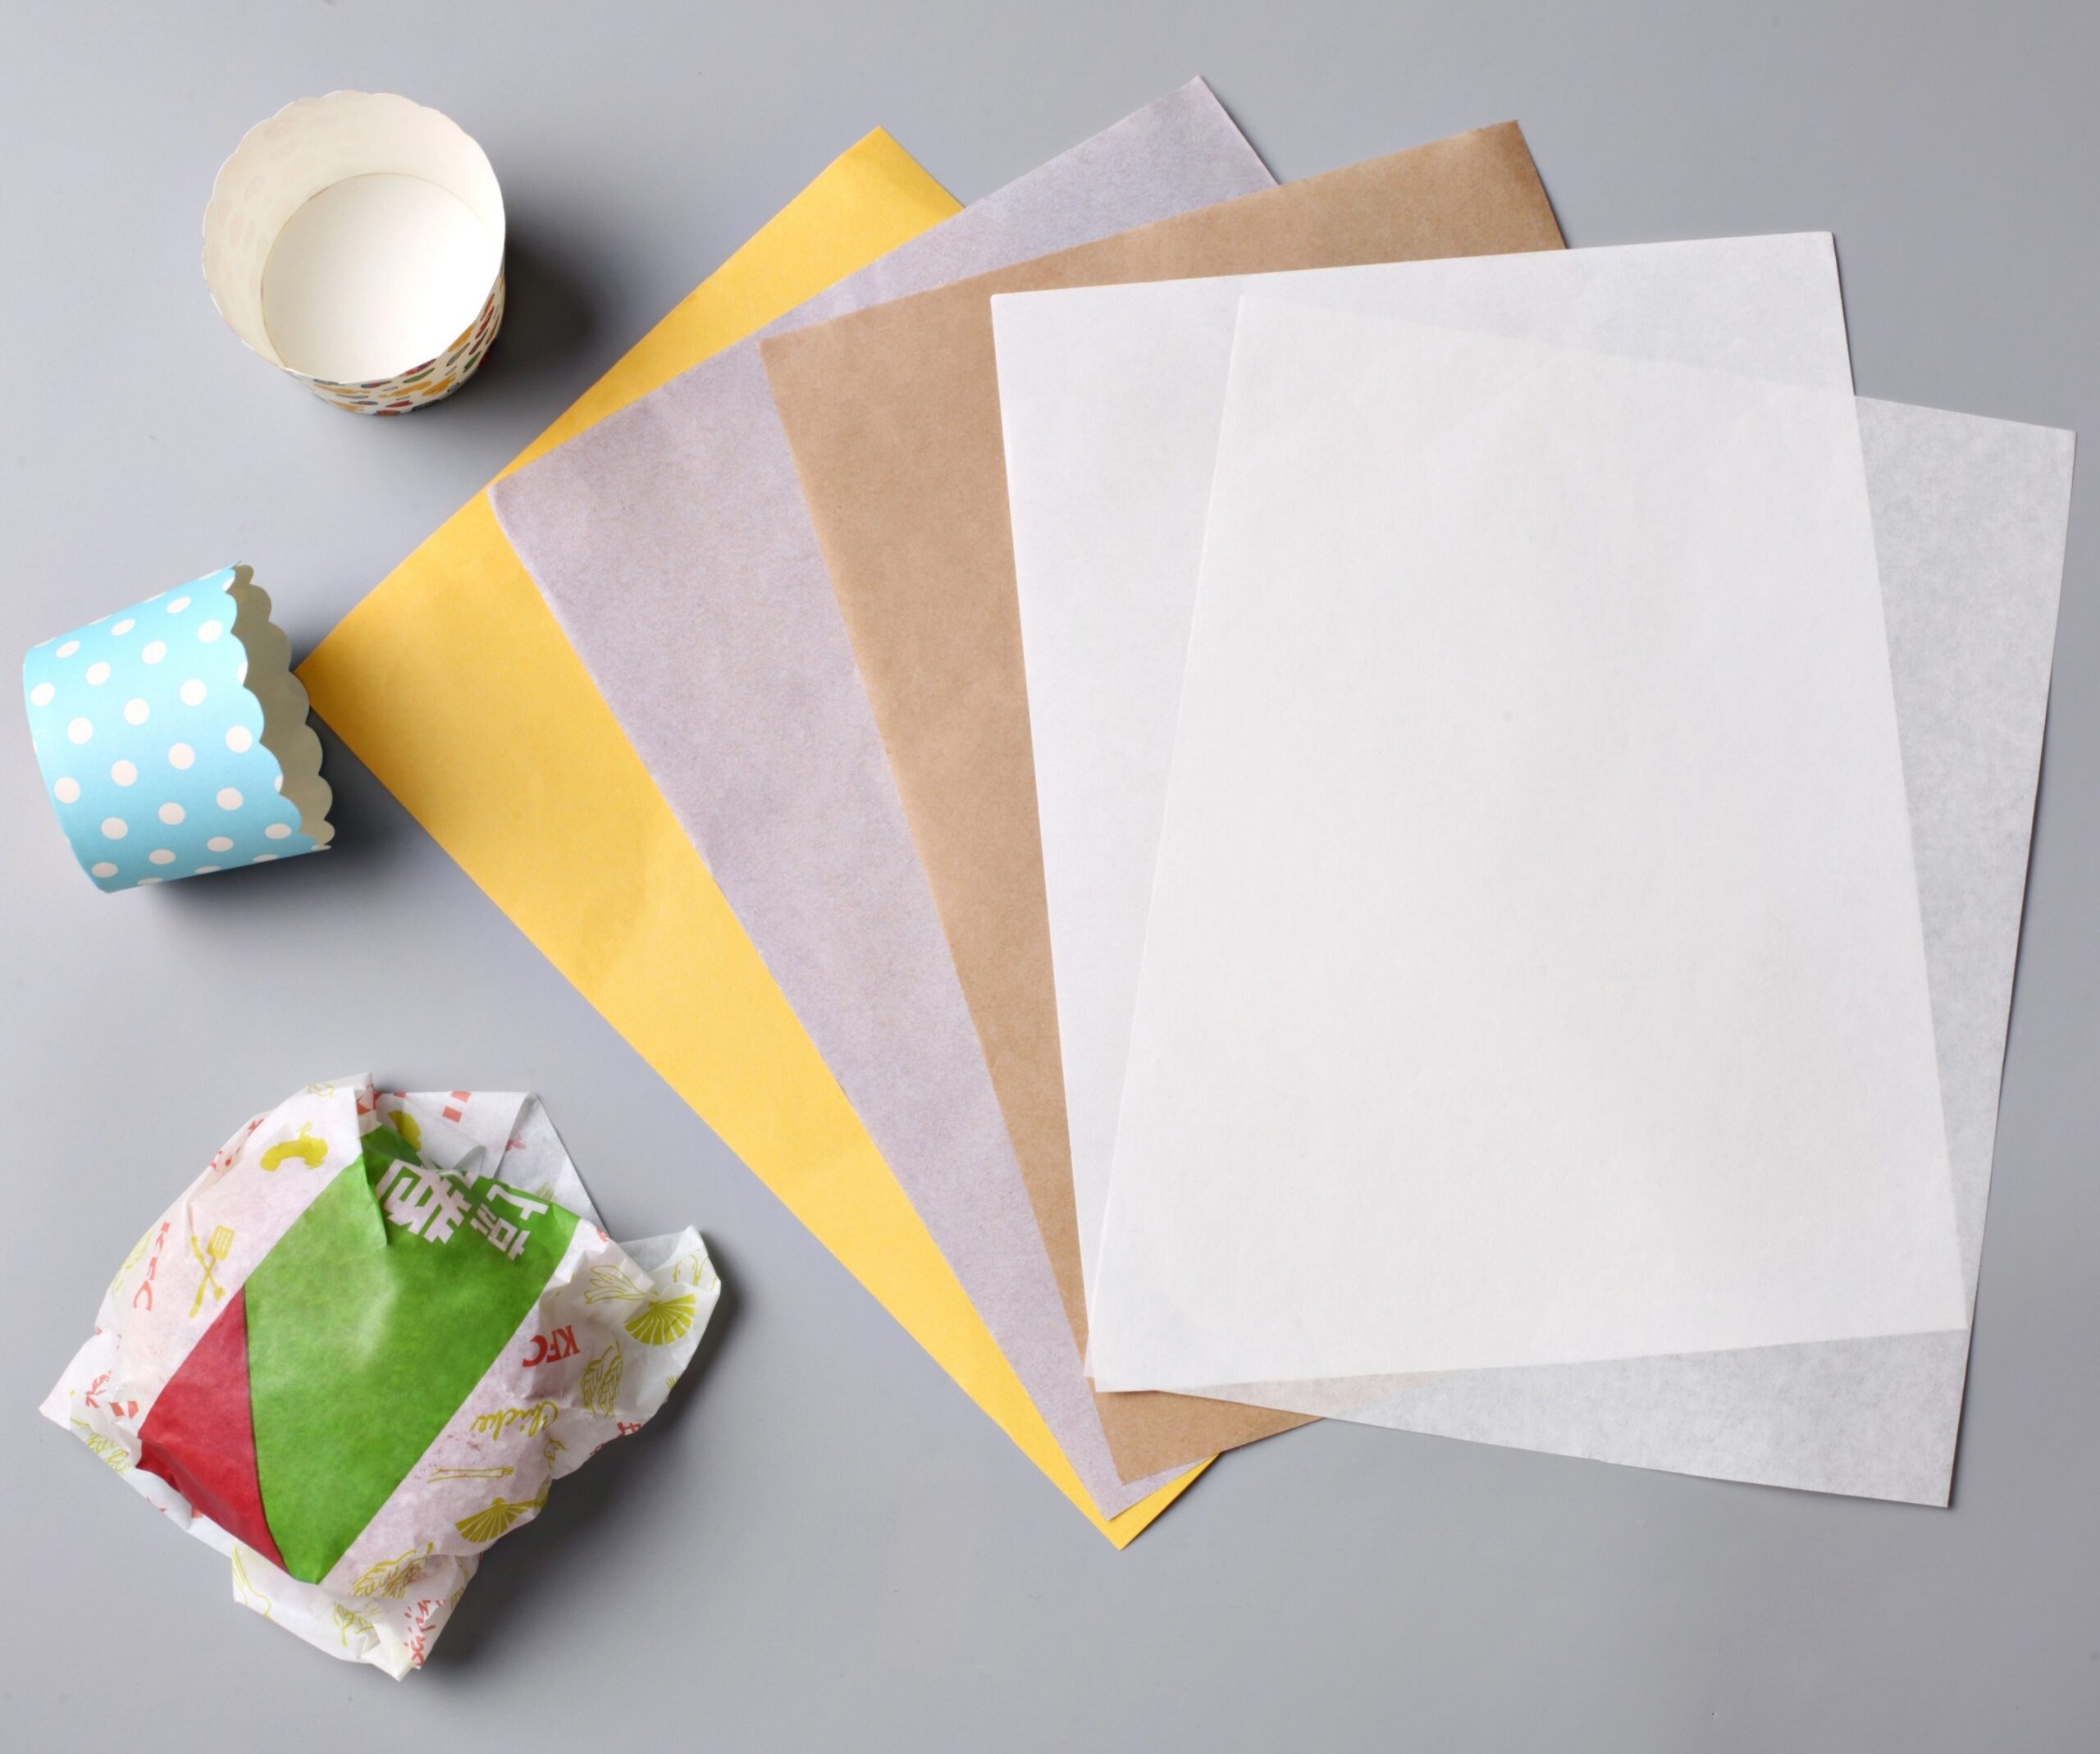 Crafting Custom Greaseproof Paper A How-to Manual for a Novice